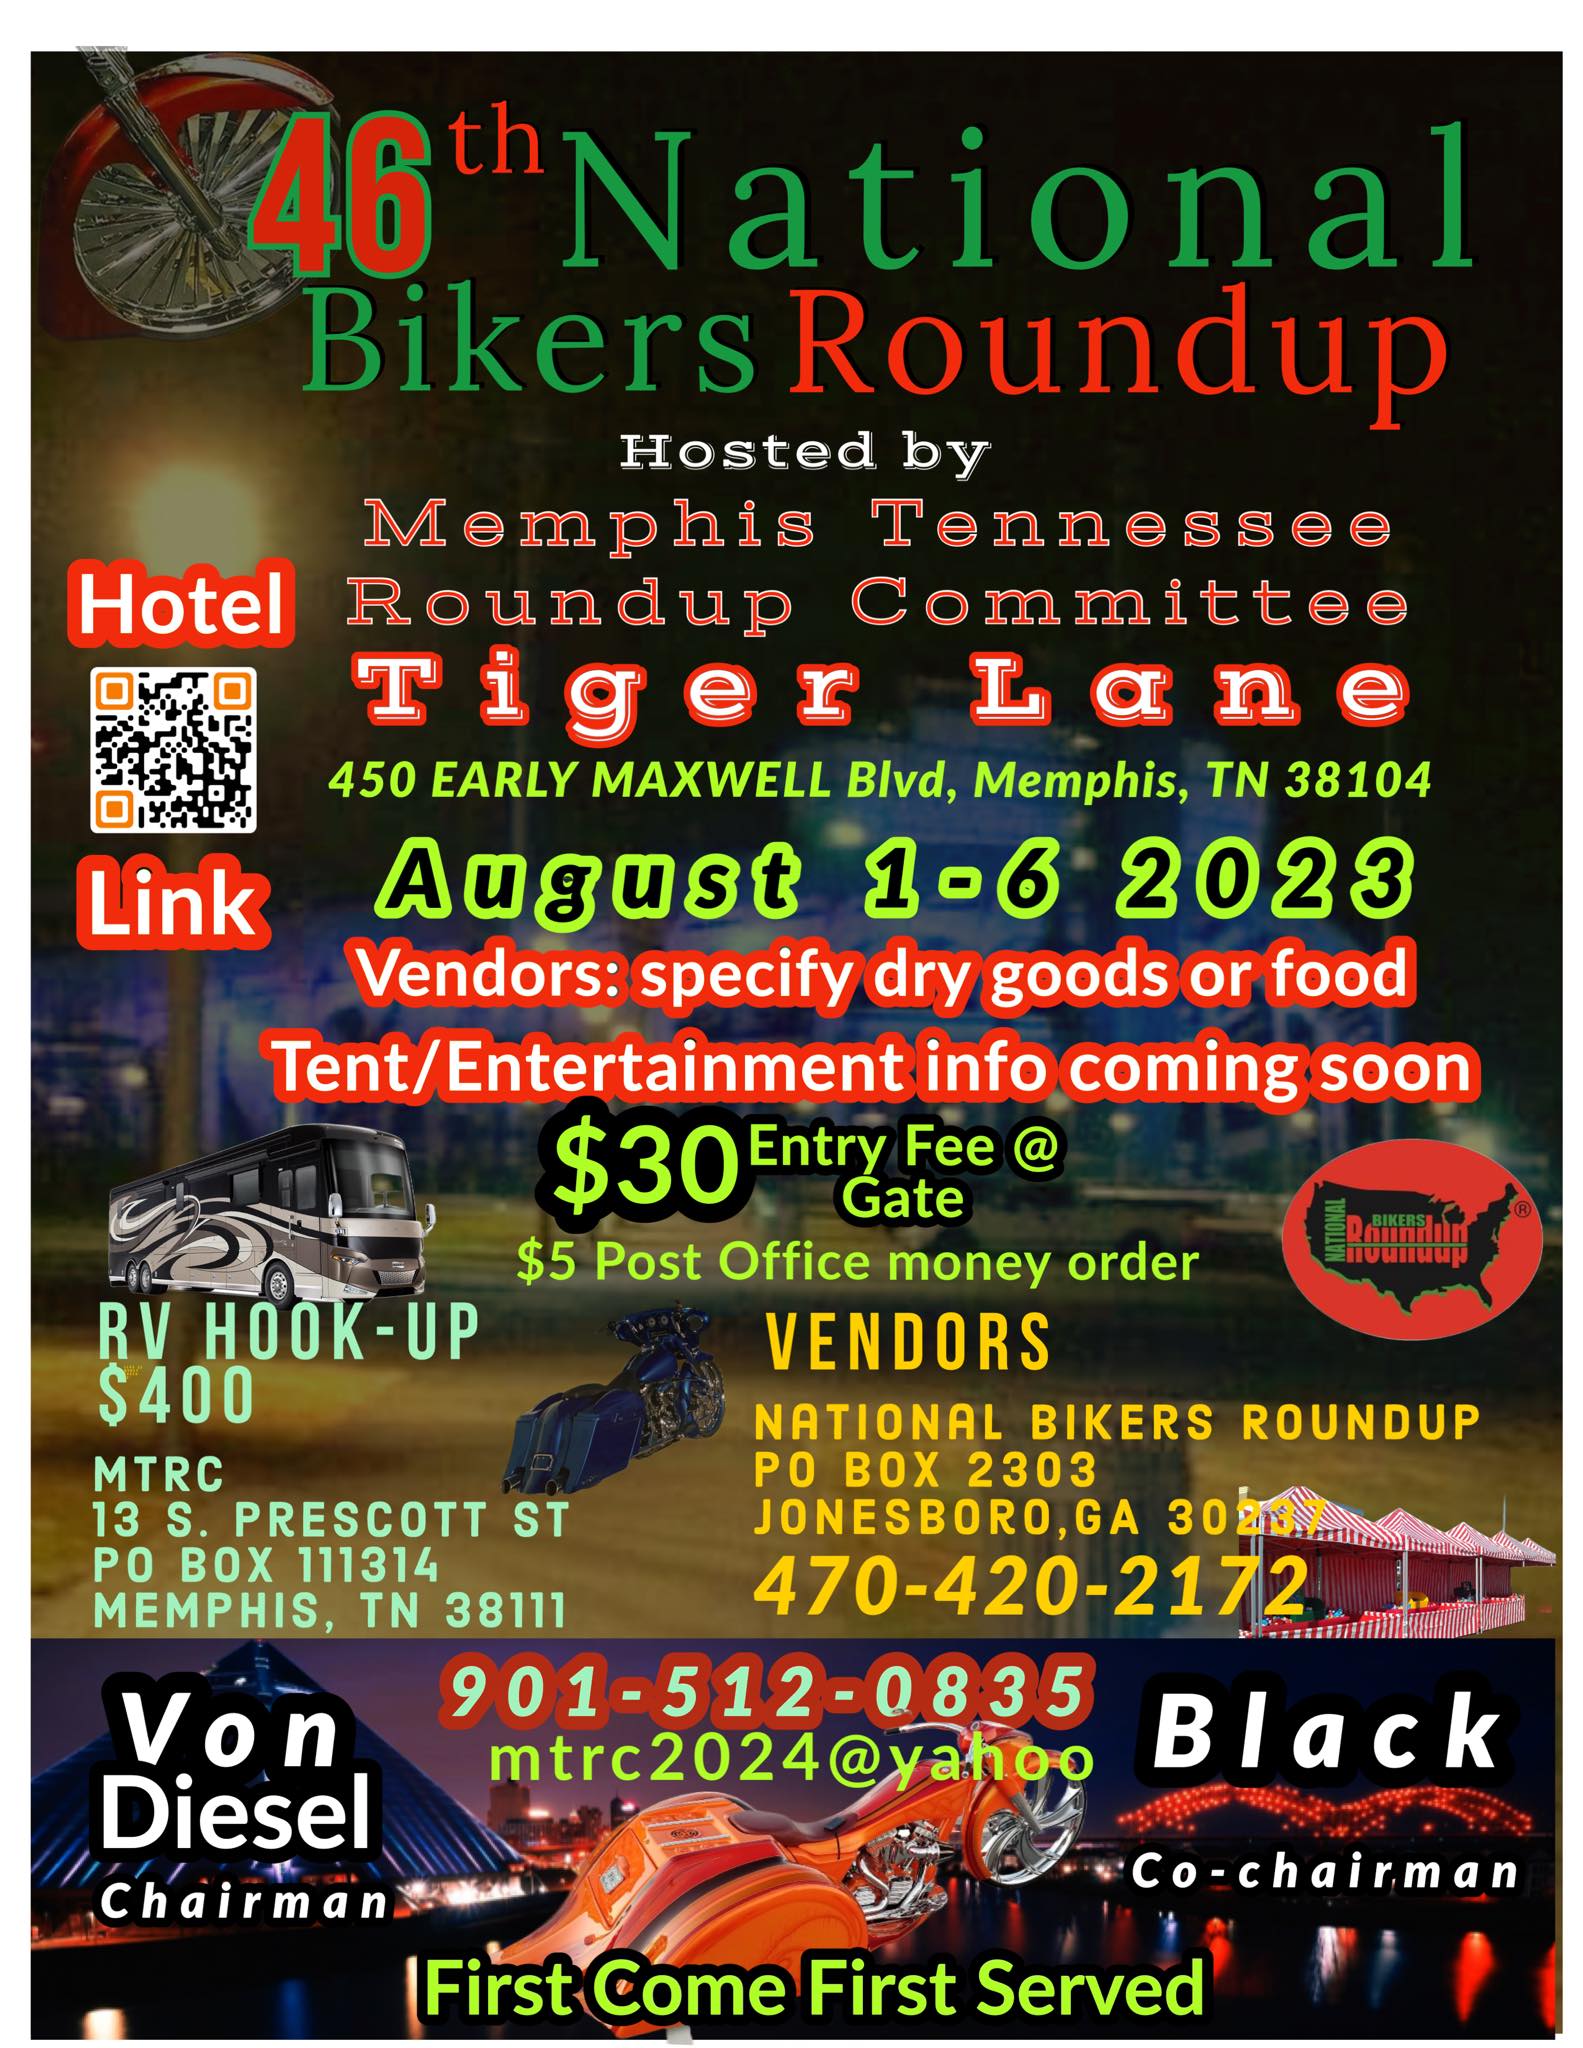 National Bikers Weekend 2023 is Back!! And we're in it!! 